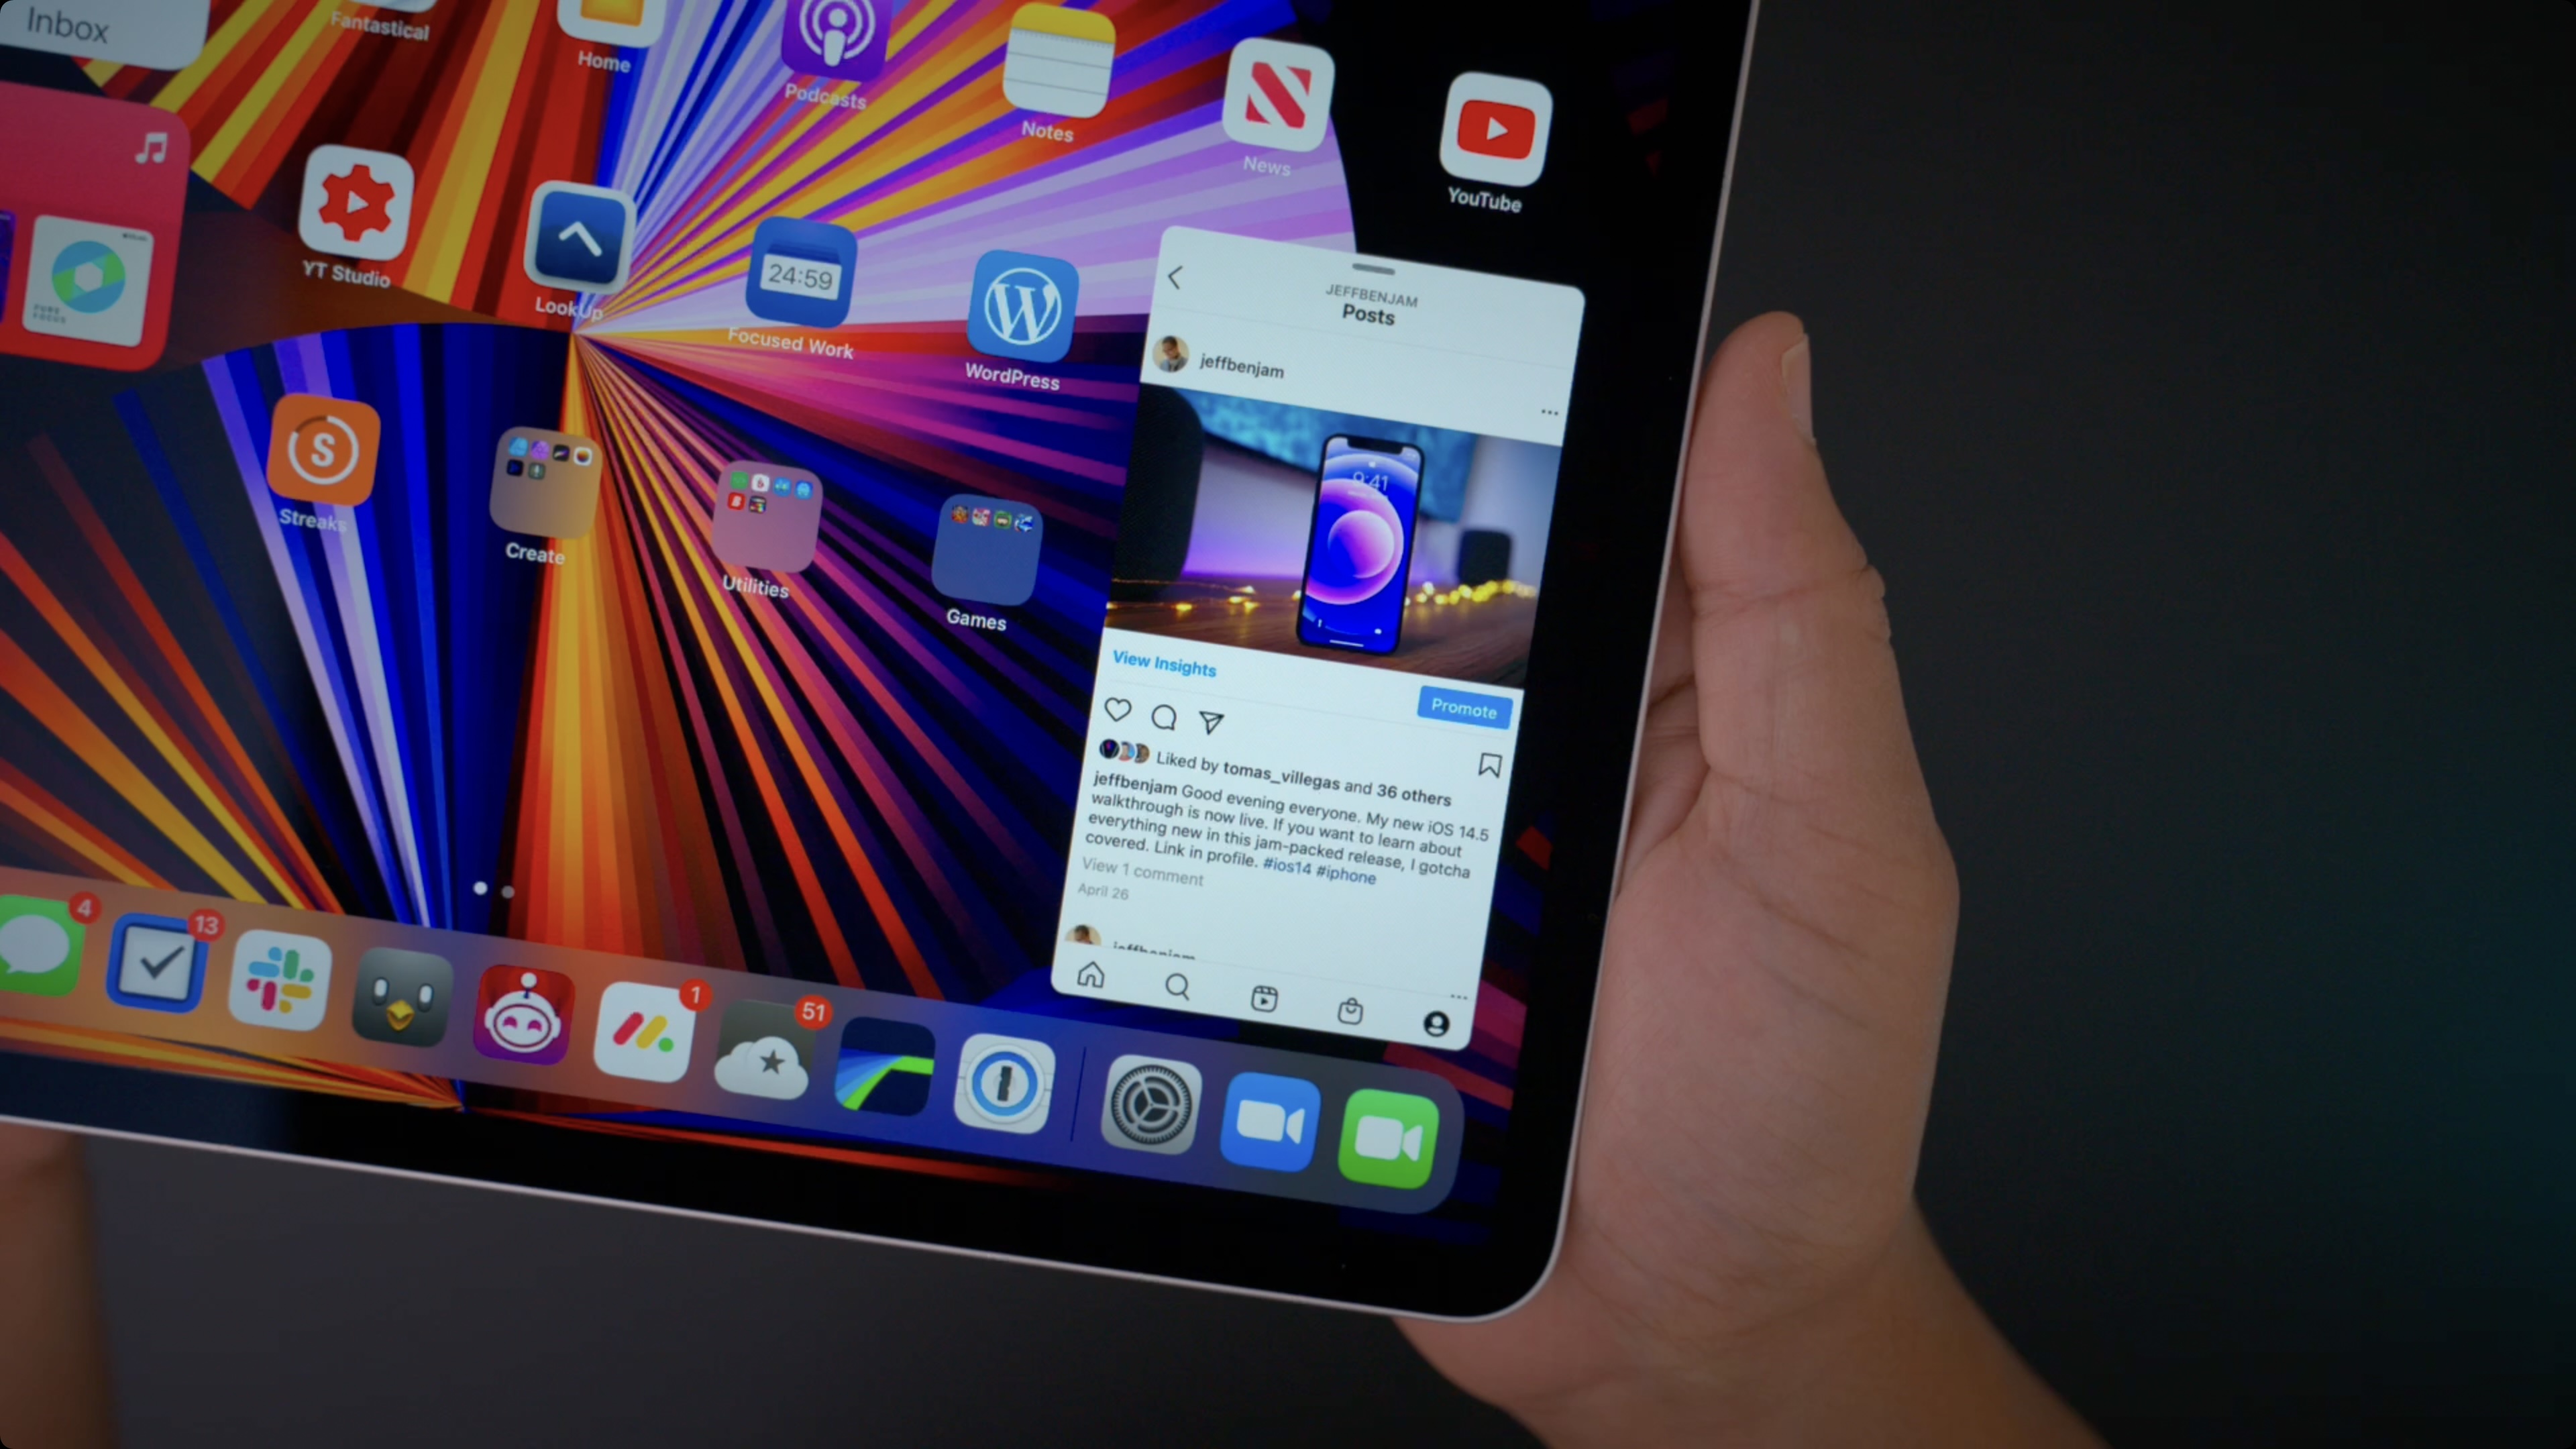 Gurman: New iPad Pro still expected later this year - 9to5Mac